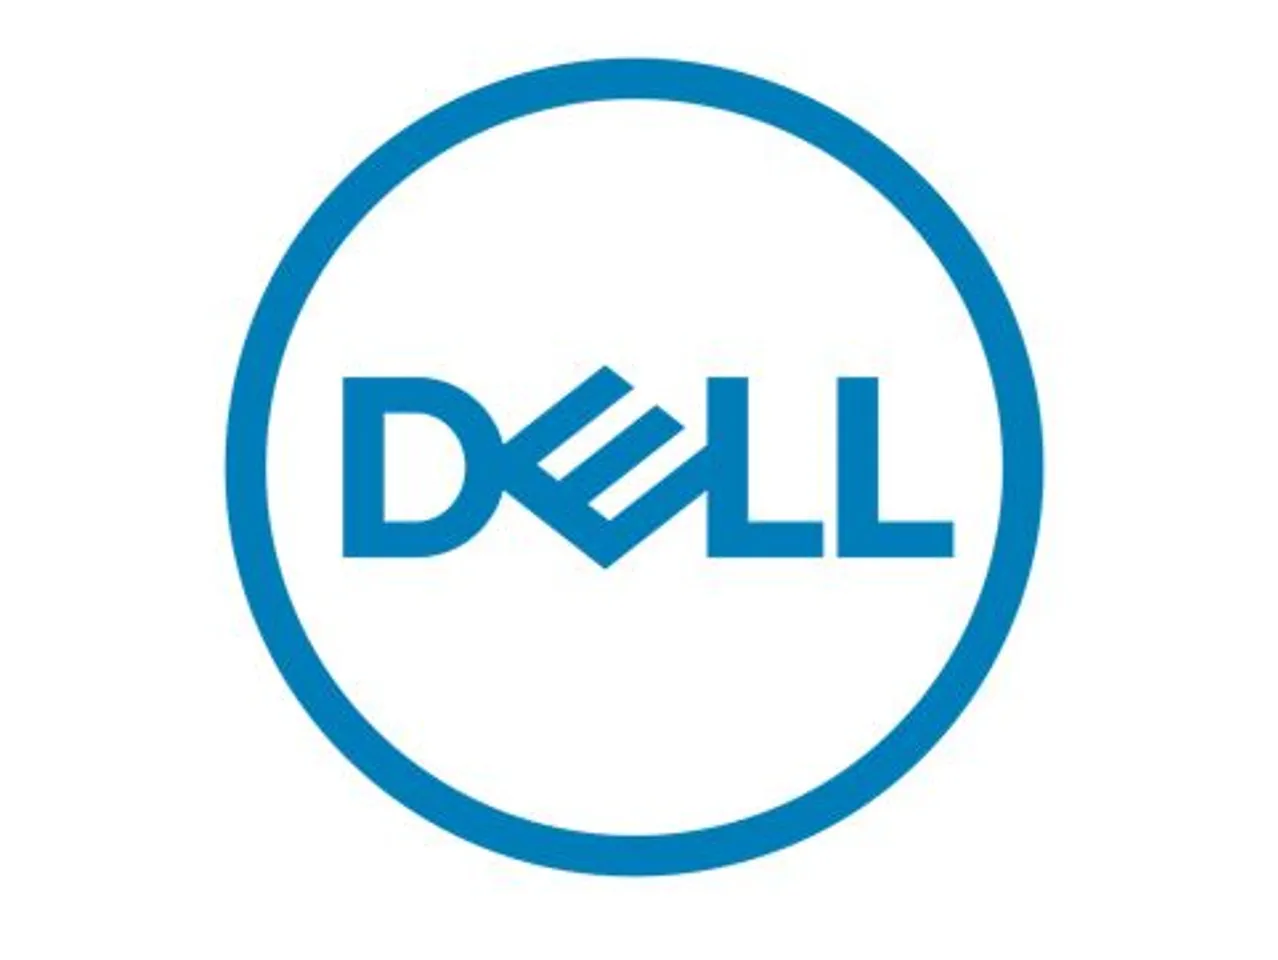 Dell Introduces Industry-First Security Suite with Advanced Threat Protection and Data Encryption